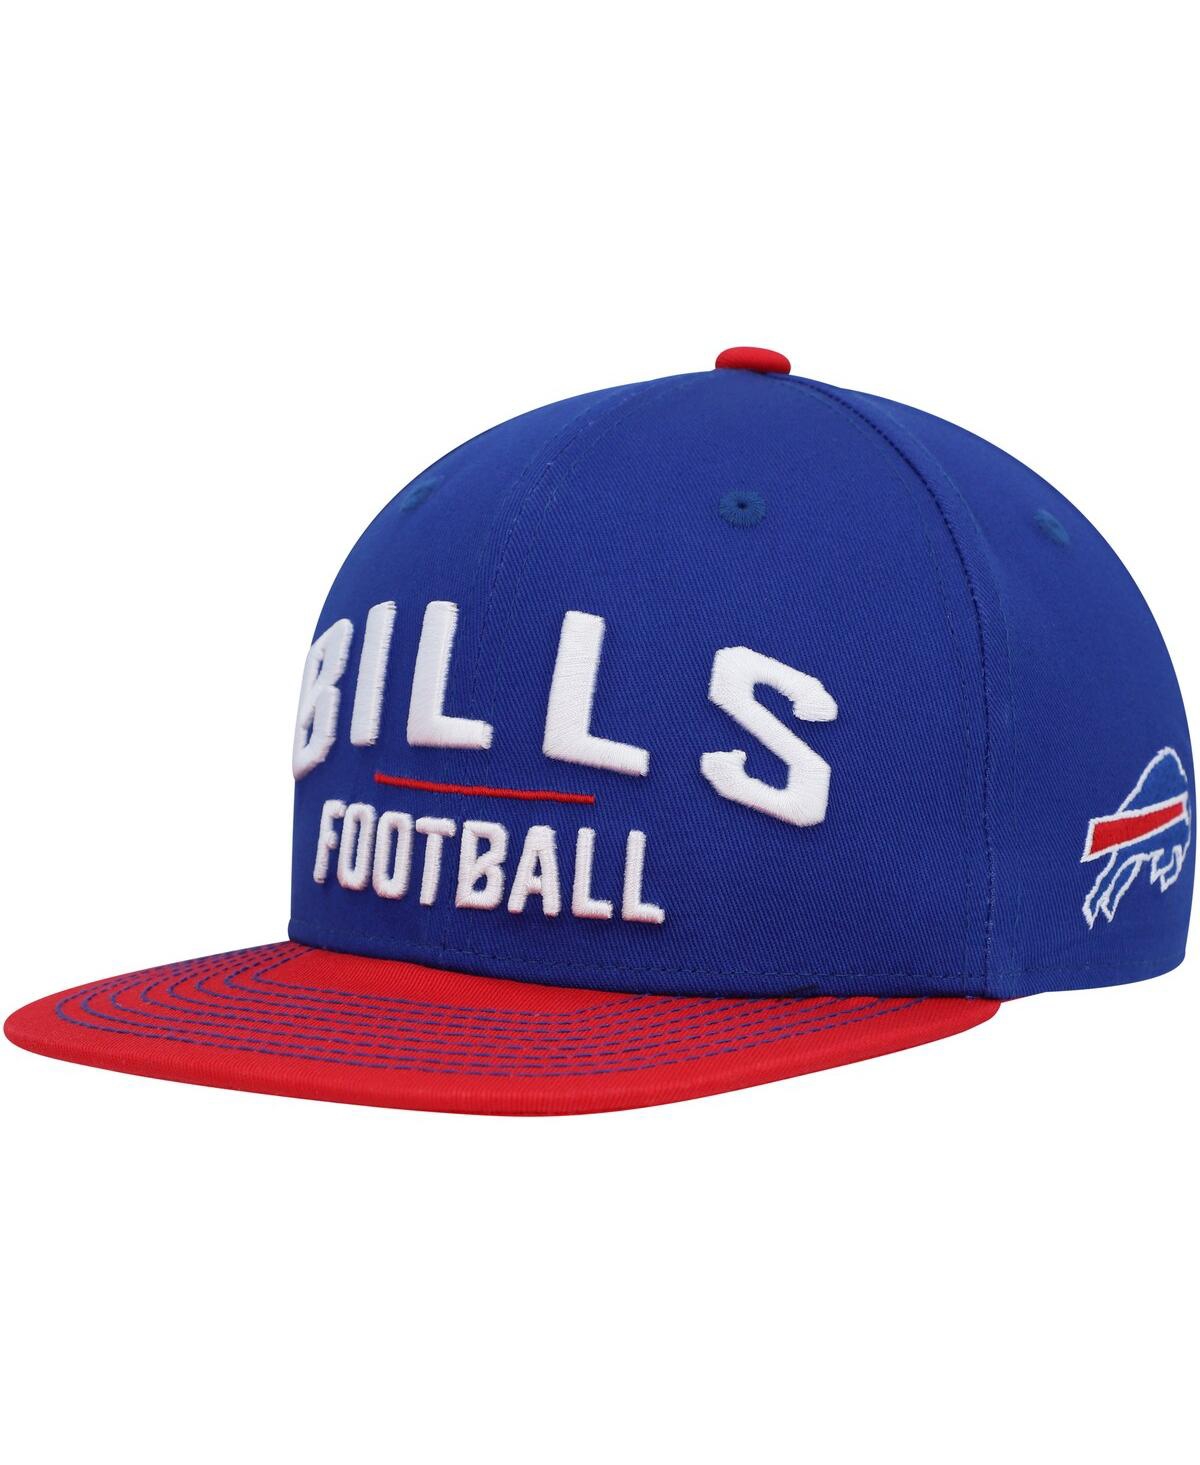 Outerstuff Kids' Big Boys And Girls Royal, Red Buffalo Bills Lock Up Snapback Hat In Royal,red